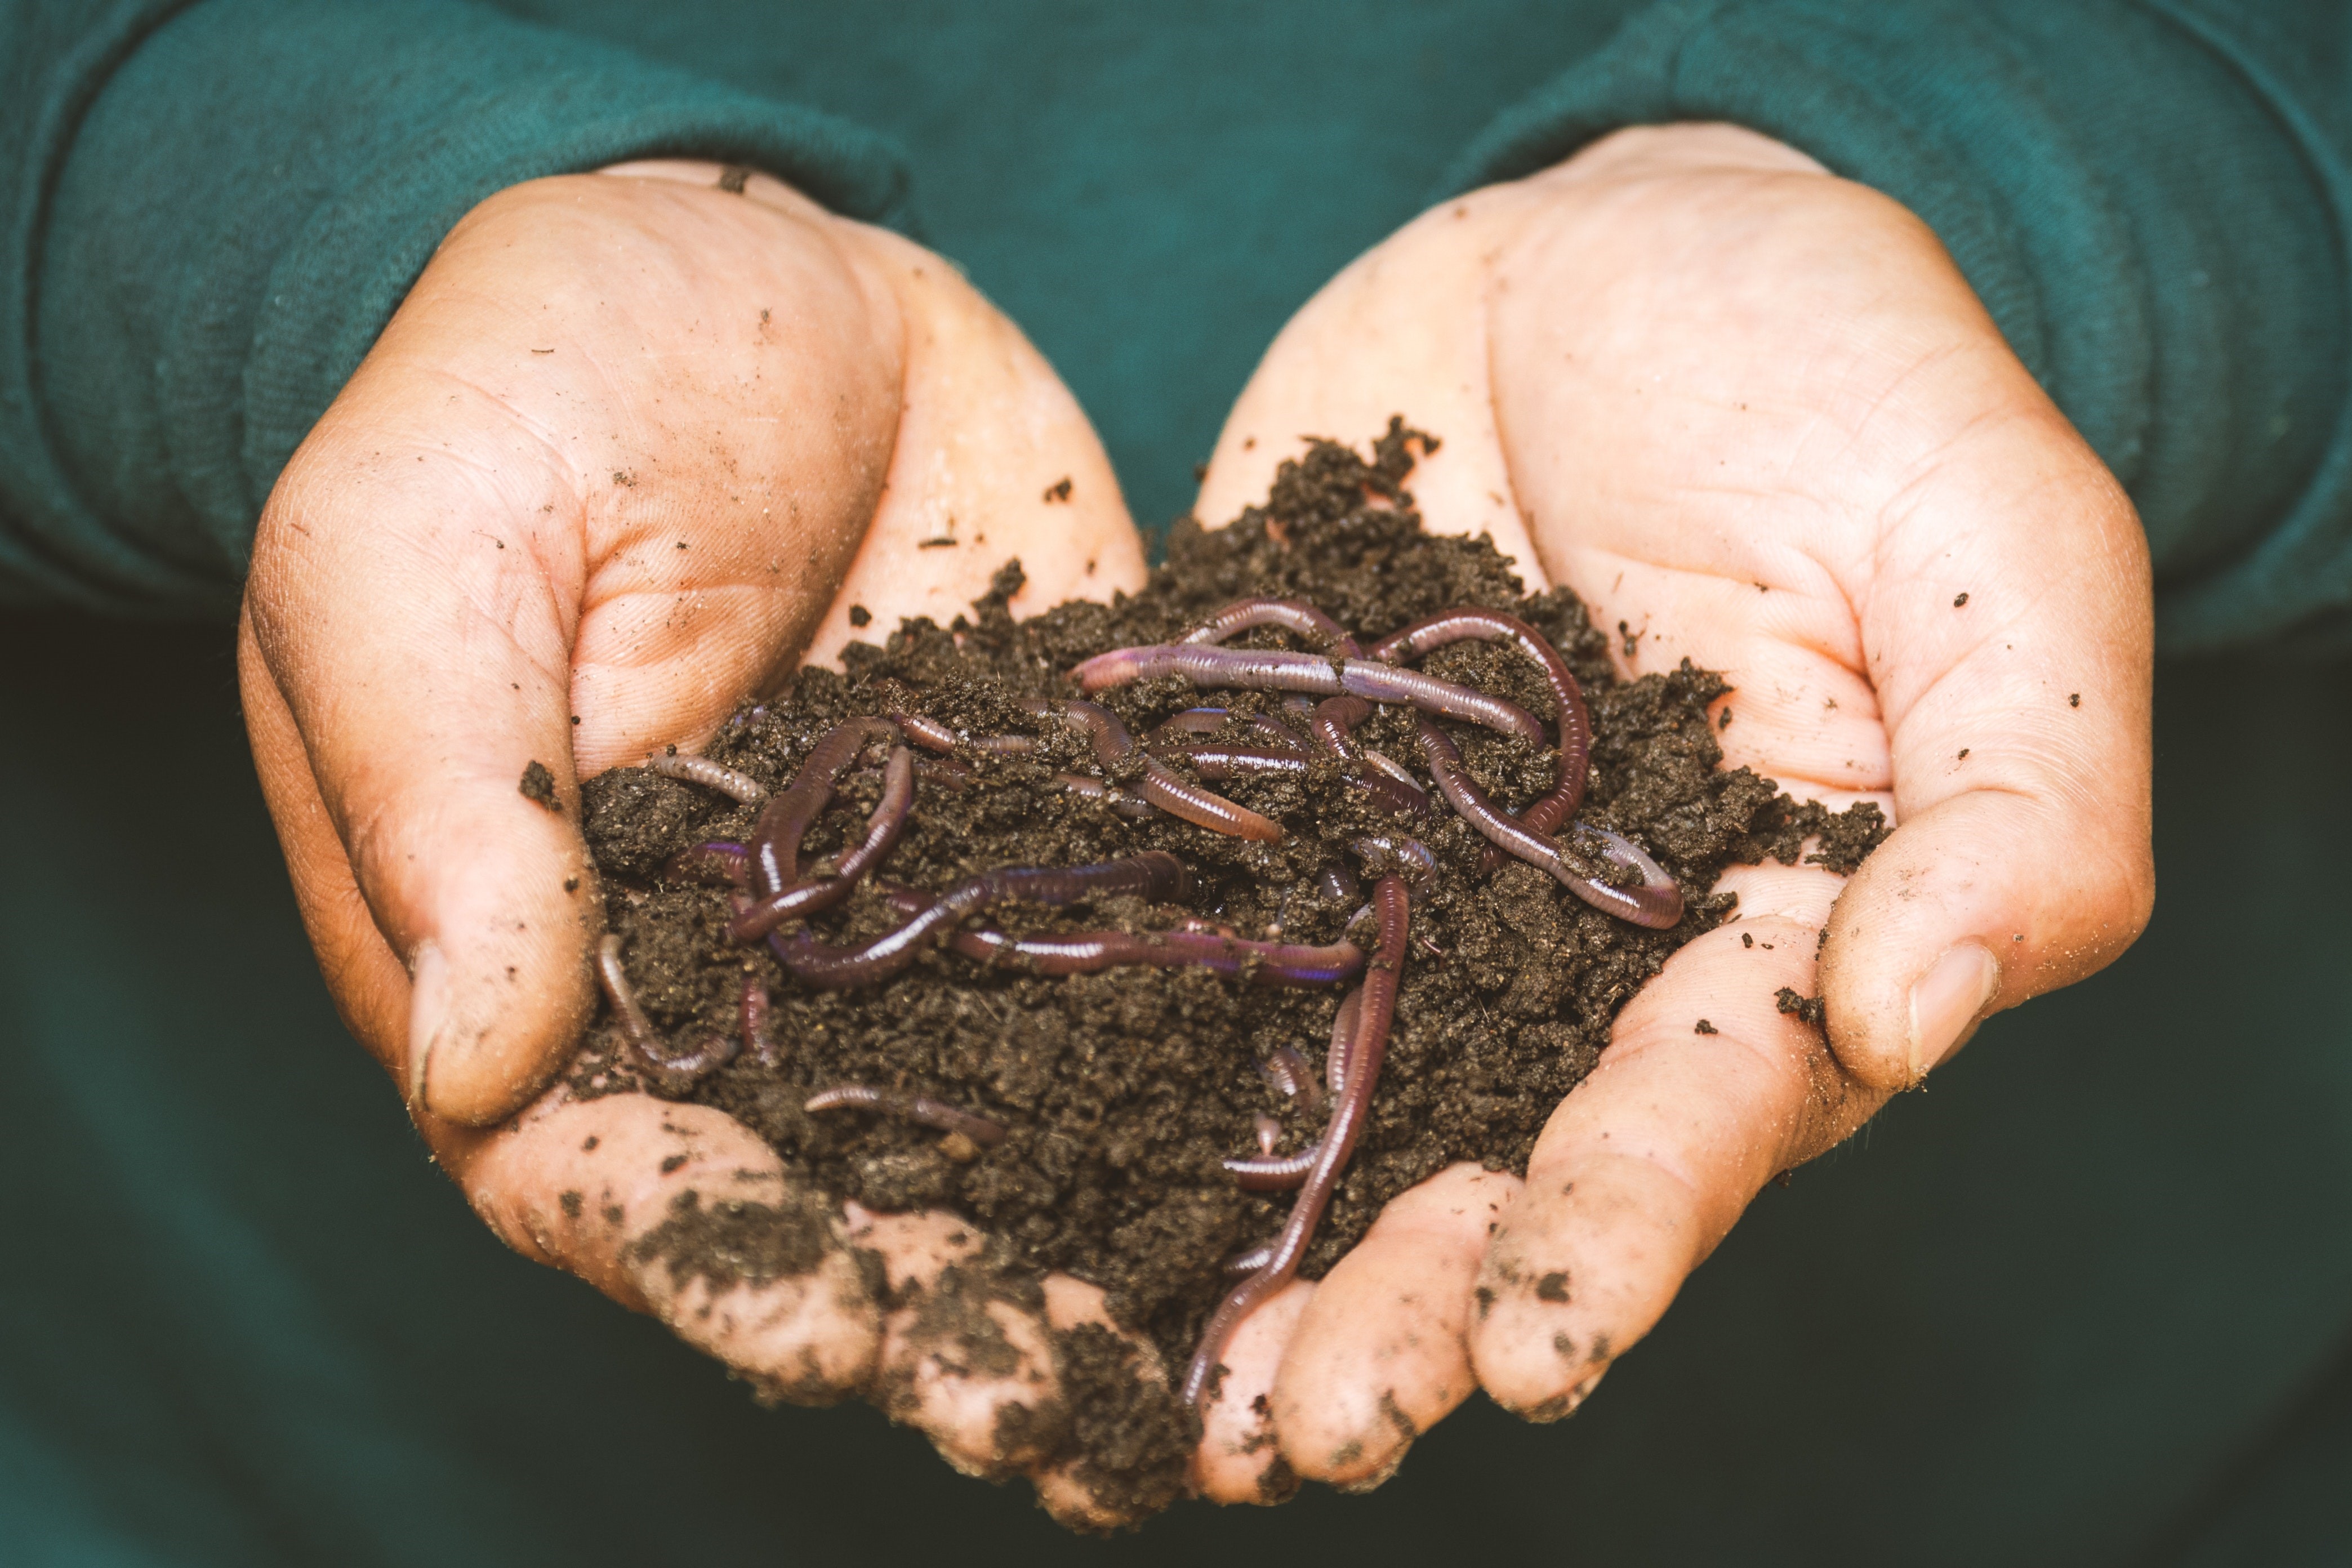 Learn how to set up your own worm farm and discover the difference between compost worms and earthworms, what to feed your worms, and how to use worm products in your garden.